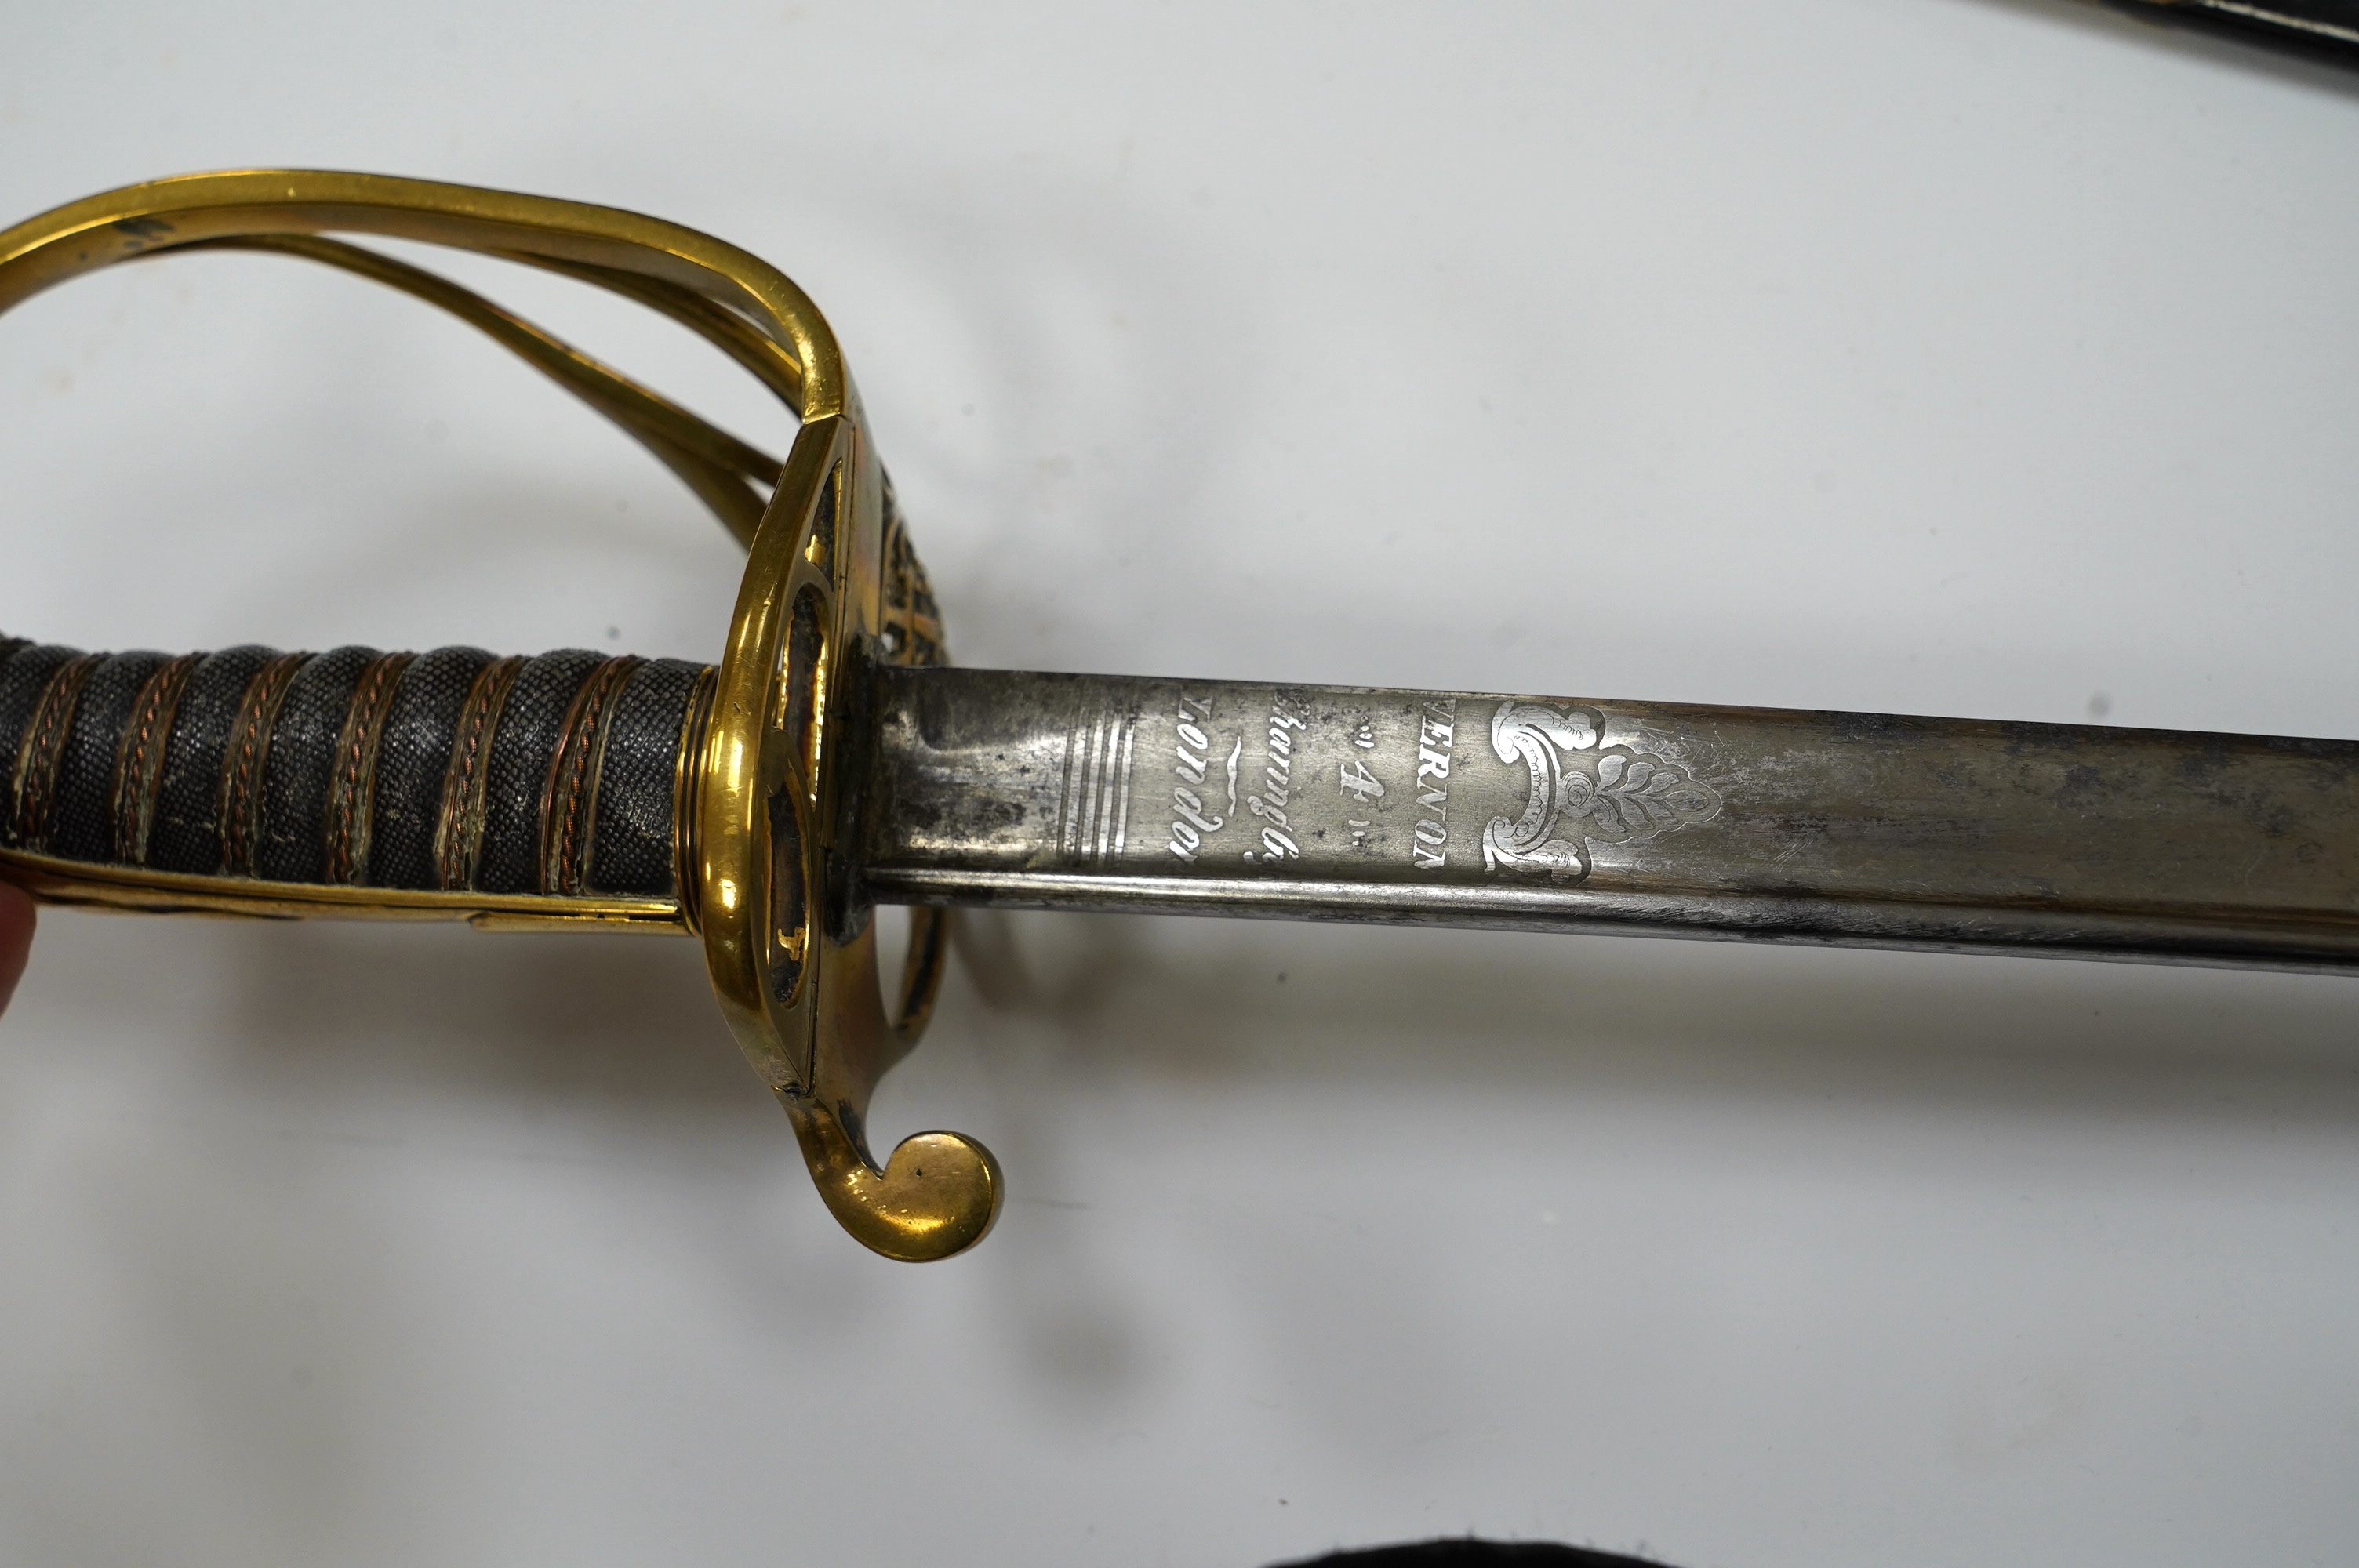 An early 19th century officer's sword, William IV cypher to knuckle guard, folding knuckle guard, engraved curved blade with William IV cypher and makers signature; ‘Vernon 4 Charing Cross London’, leather scabbard with